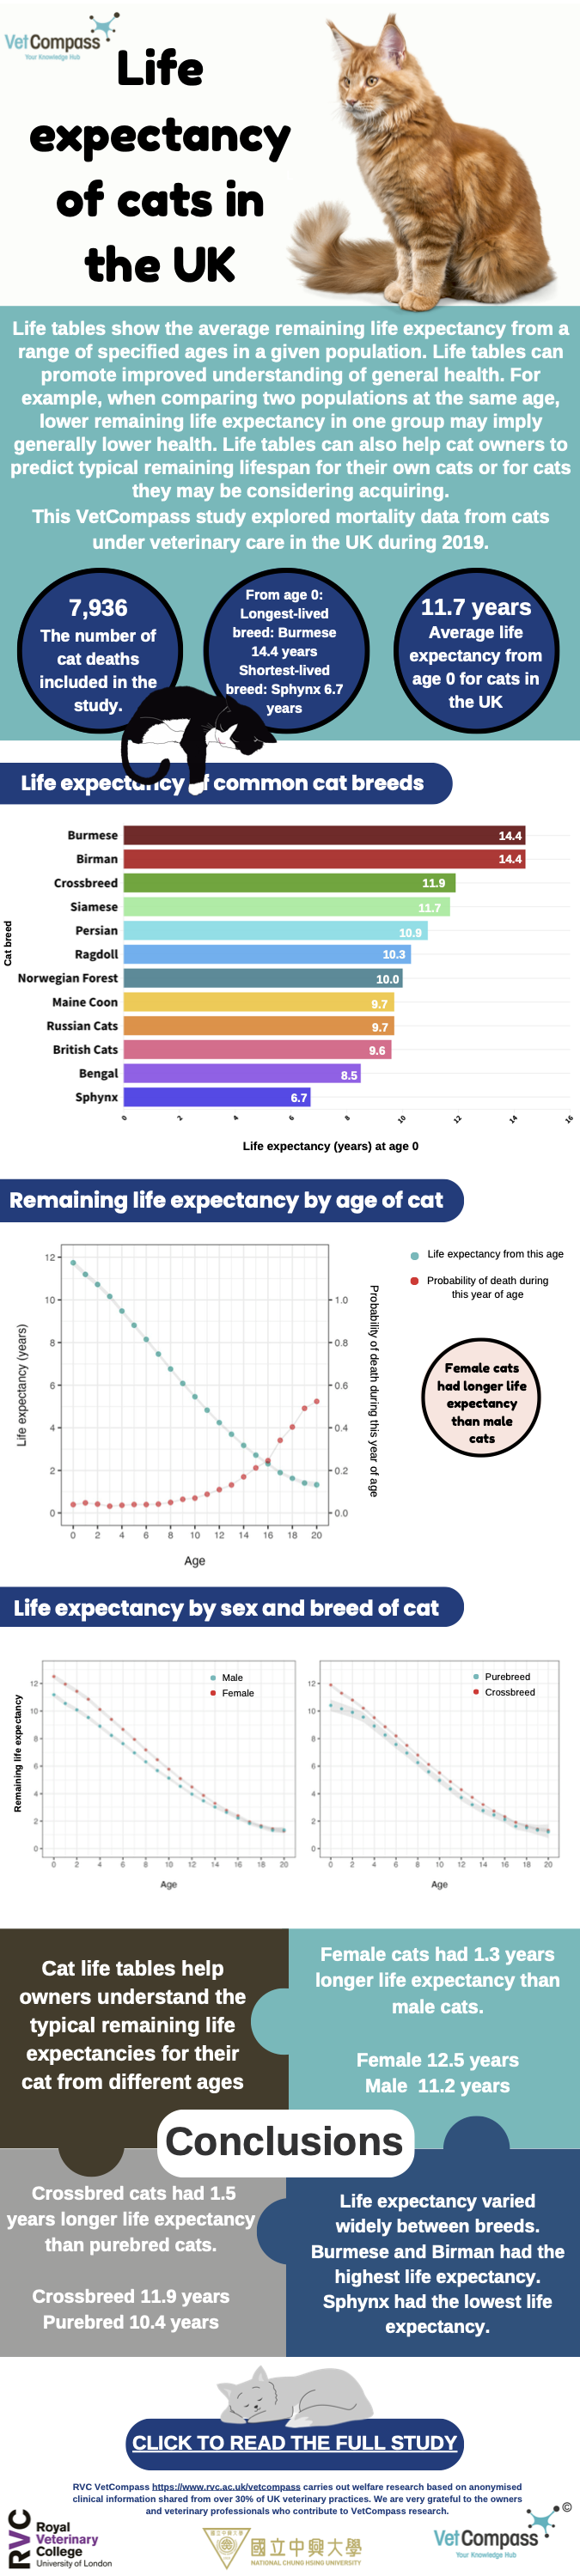 Infographic_cat_lifetable